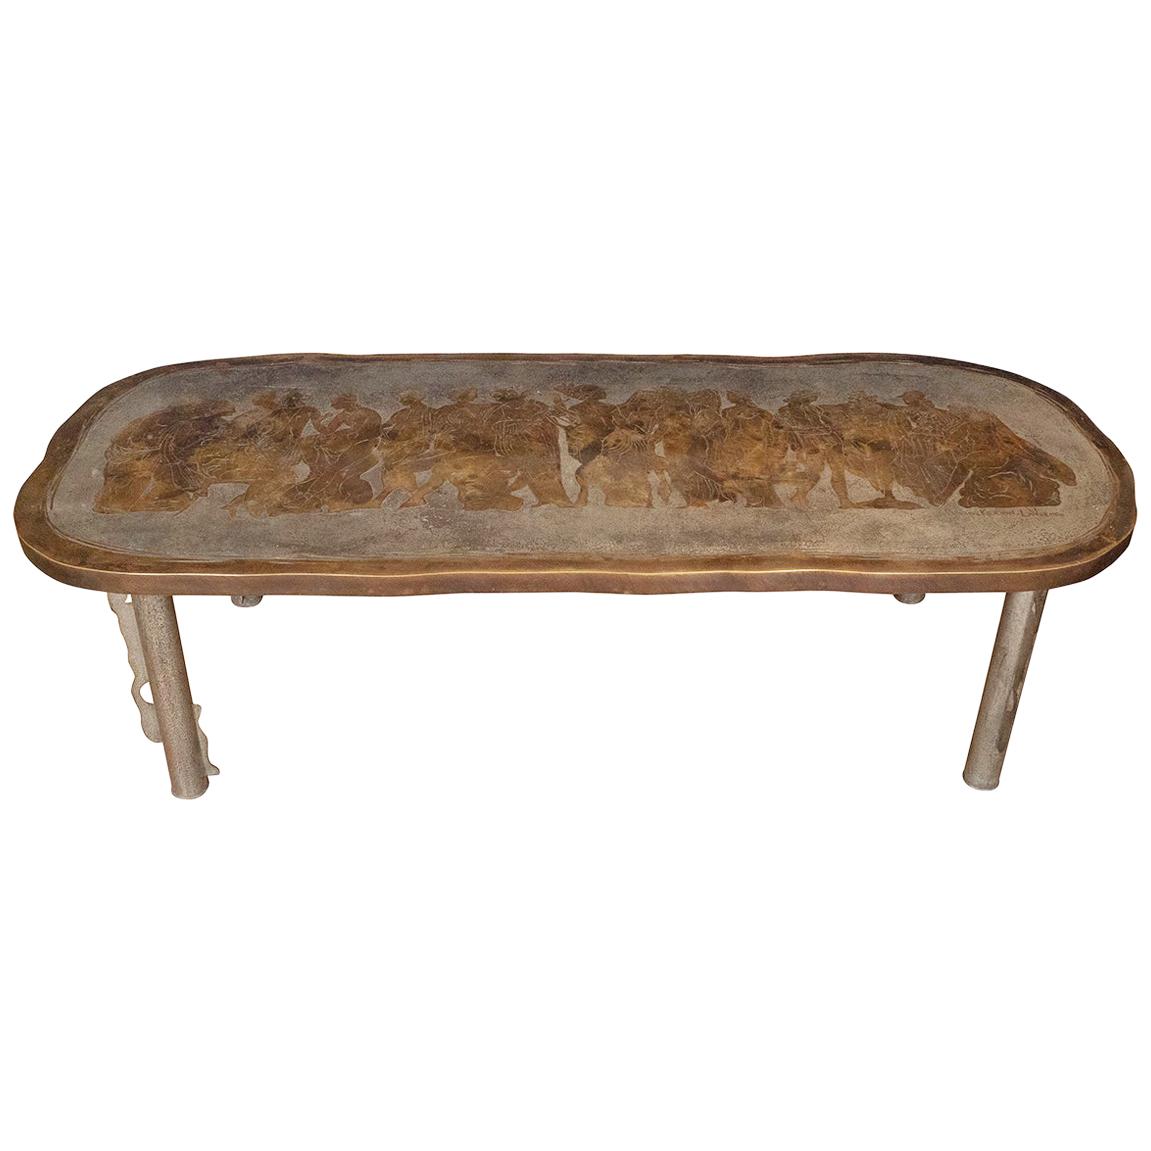 Patinated Metal "Romanesque" Design Coffee Table